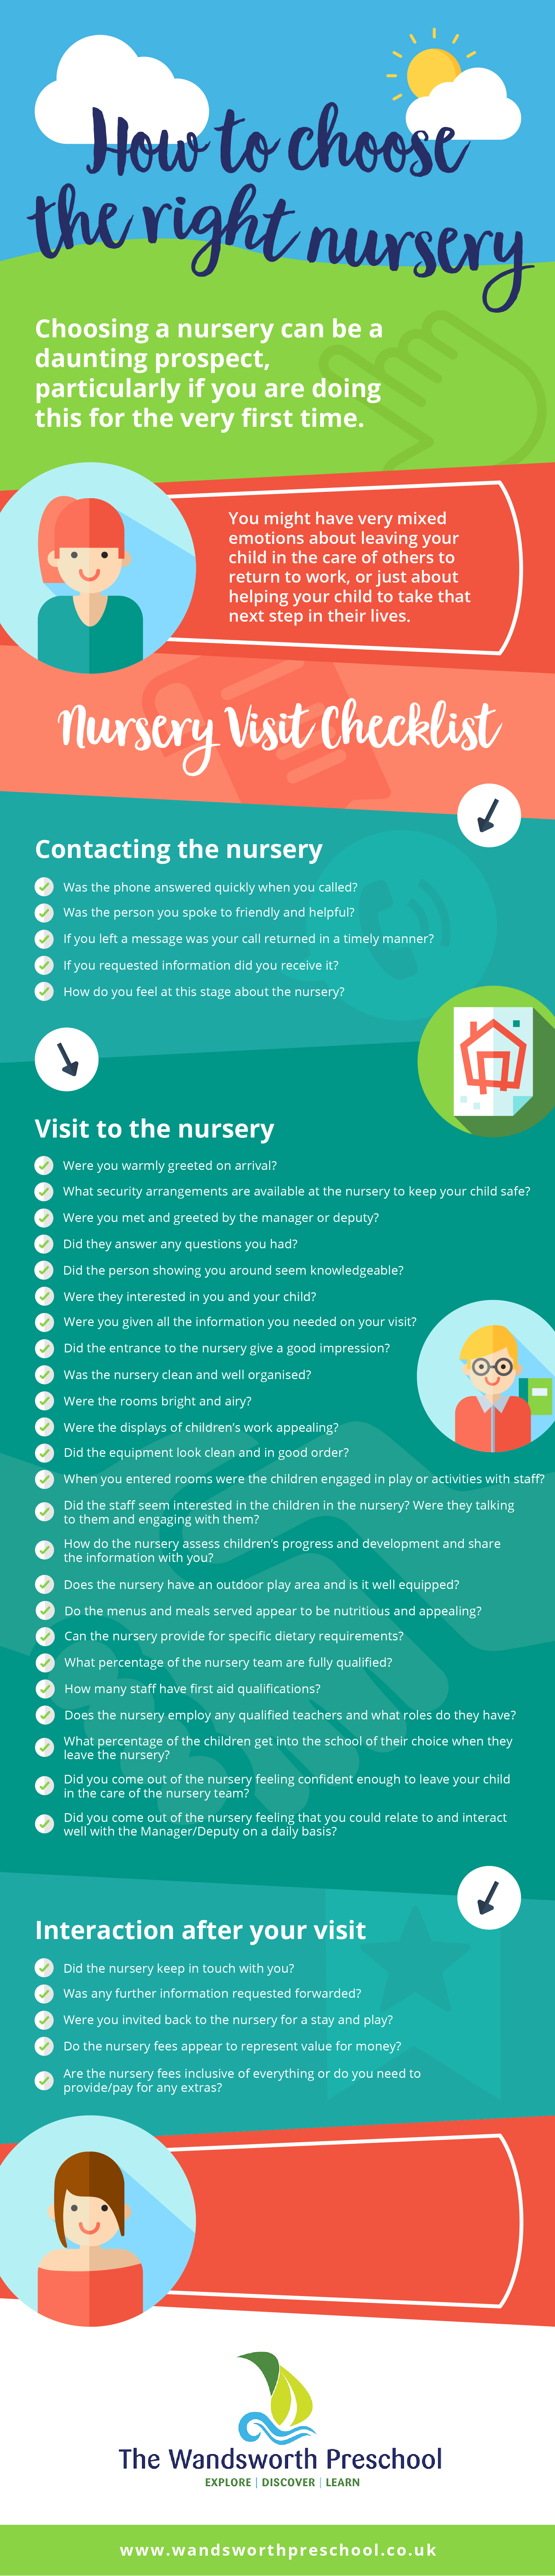 How to find the right nursery